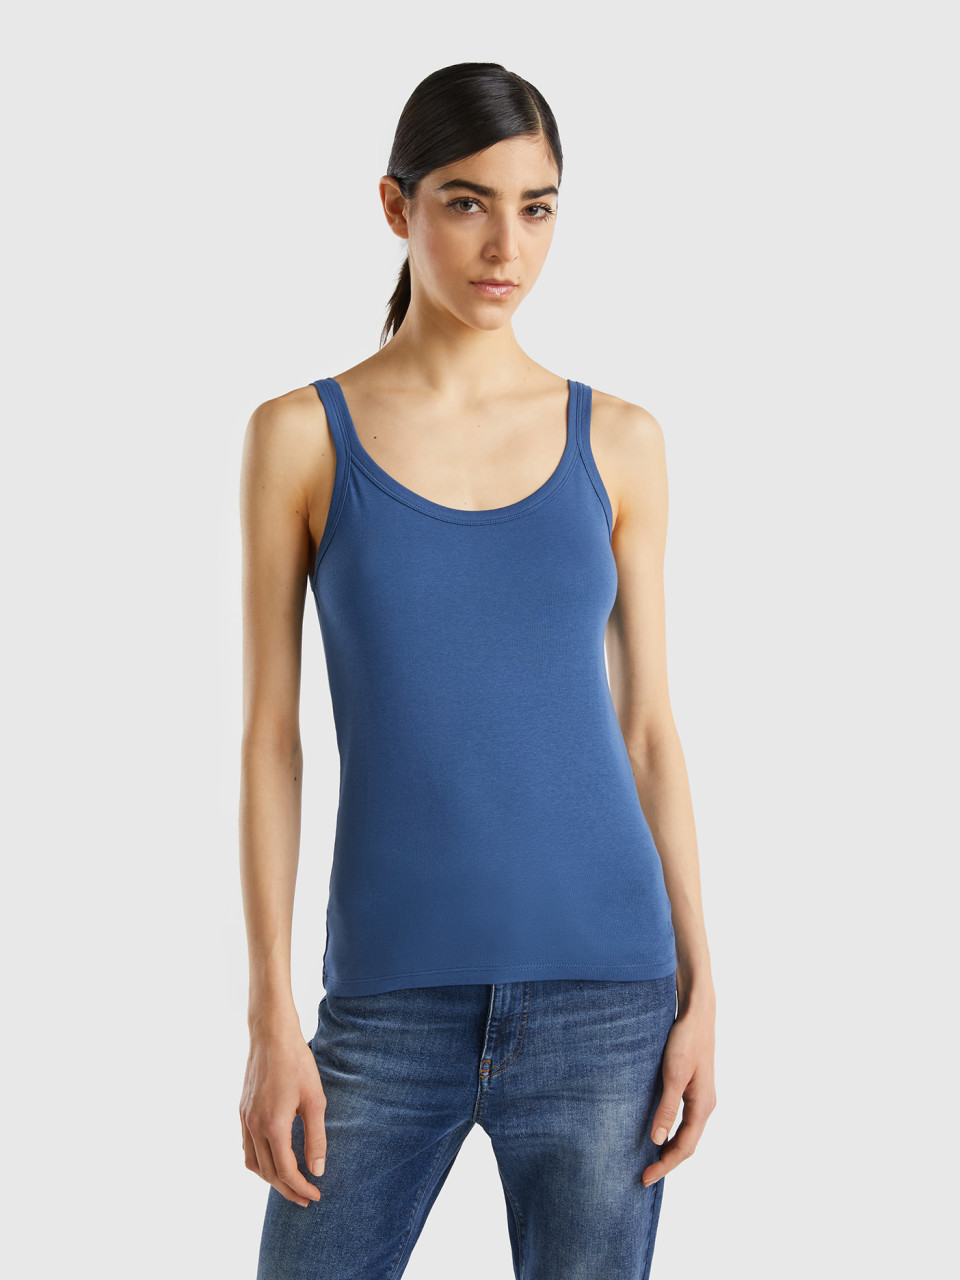 Benetton, Air Force Blue Tank Top In Pure Cotton, Air Force Blue, Women